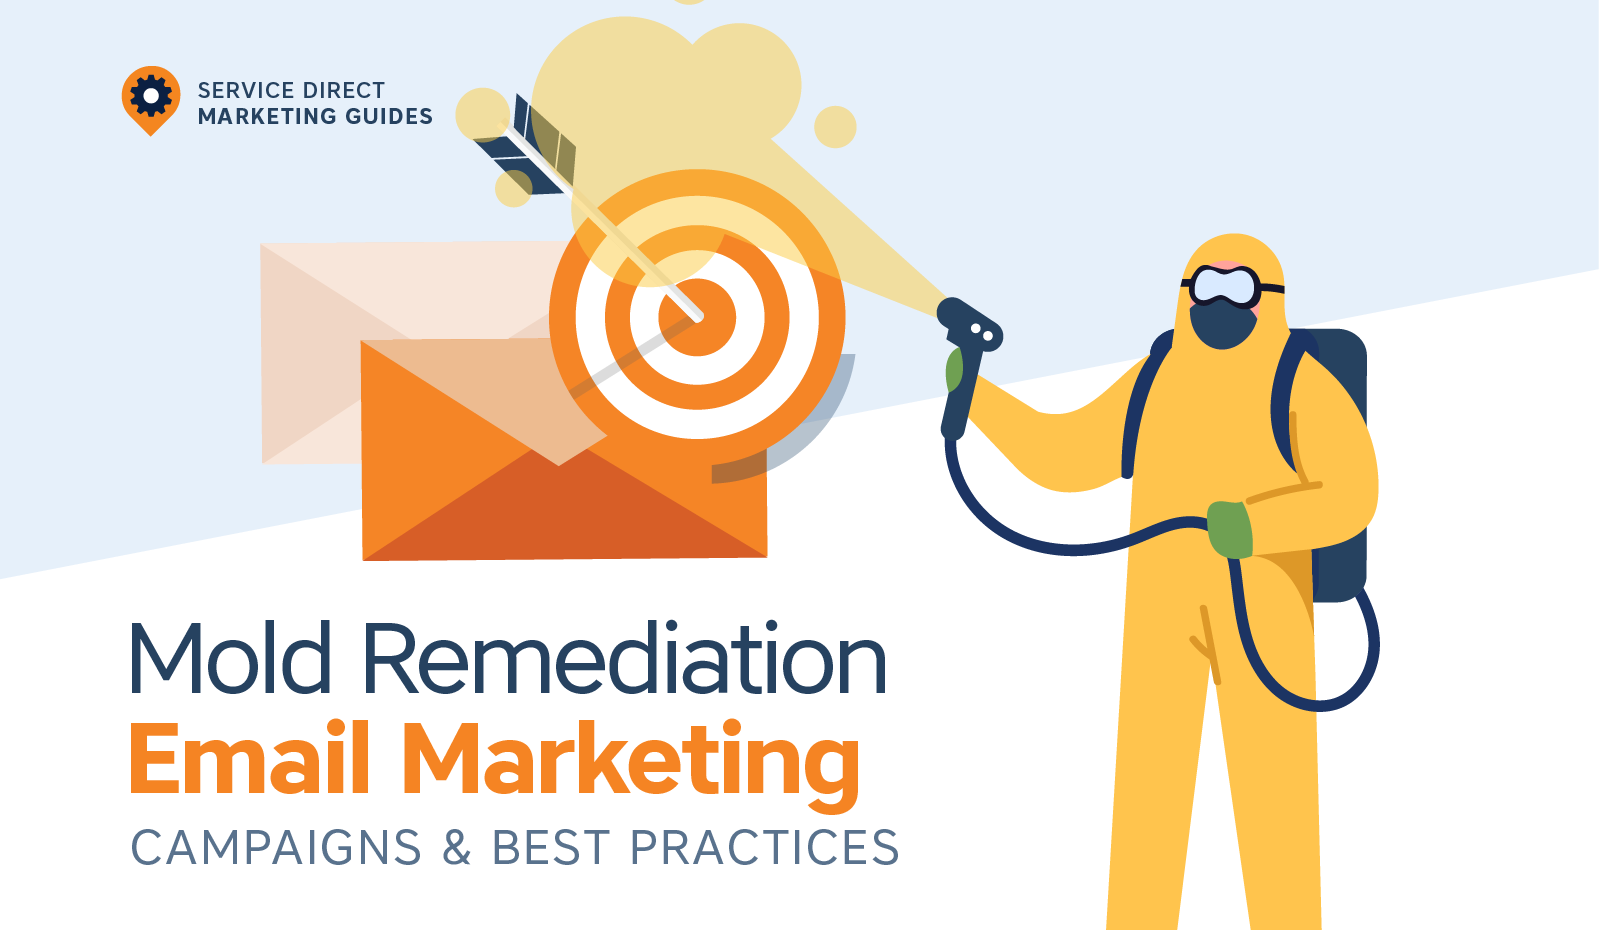 Mold Remediation Email Marketing Campaigns & Best Practices